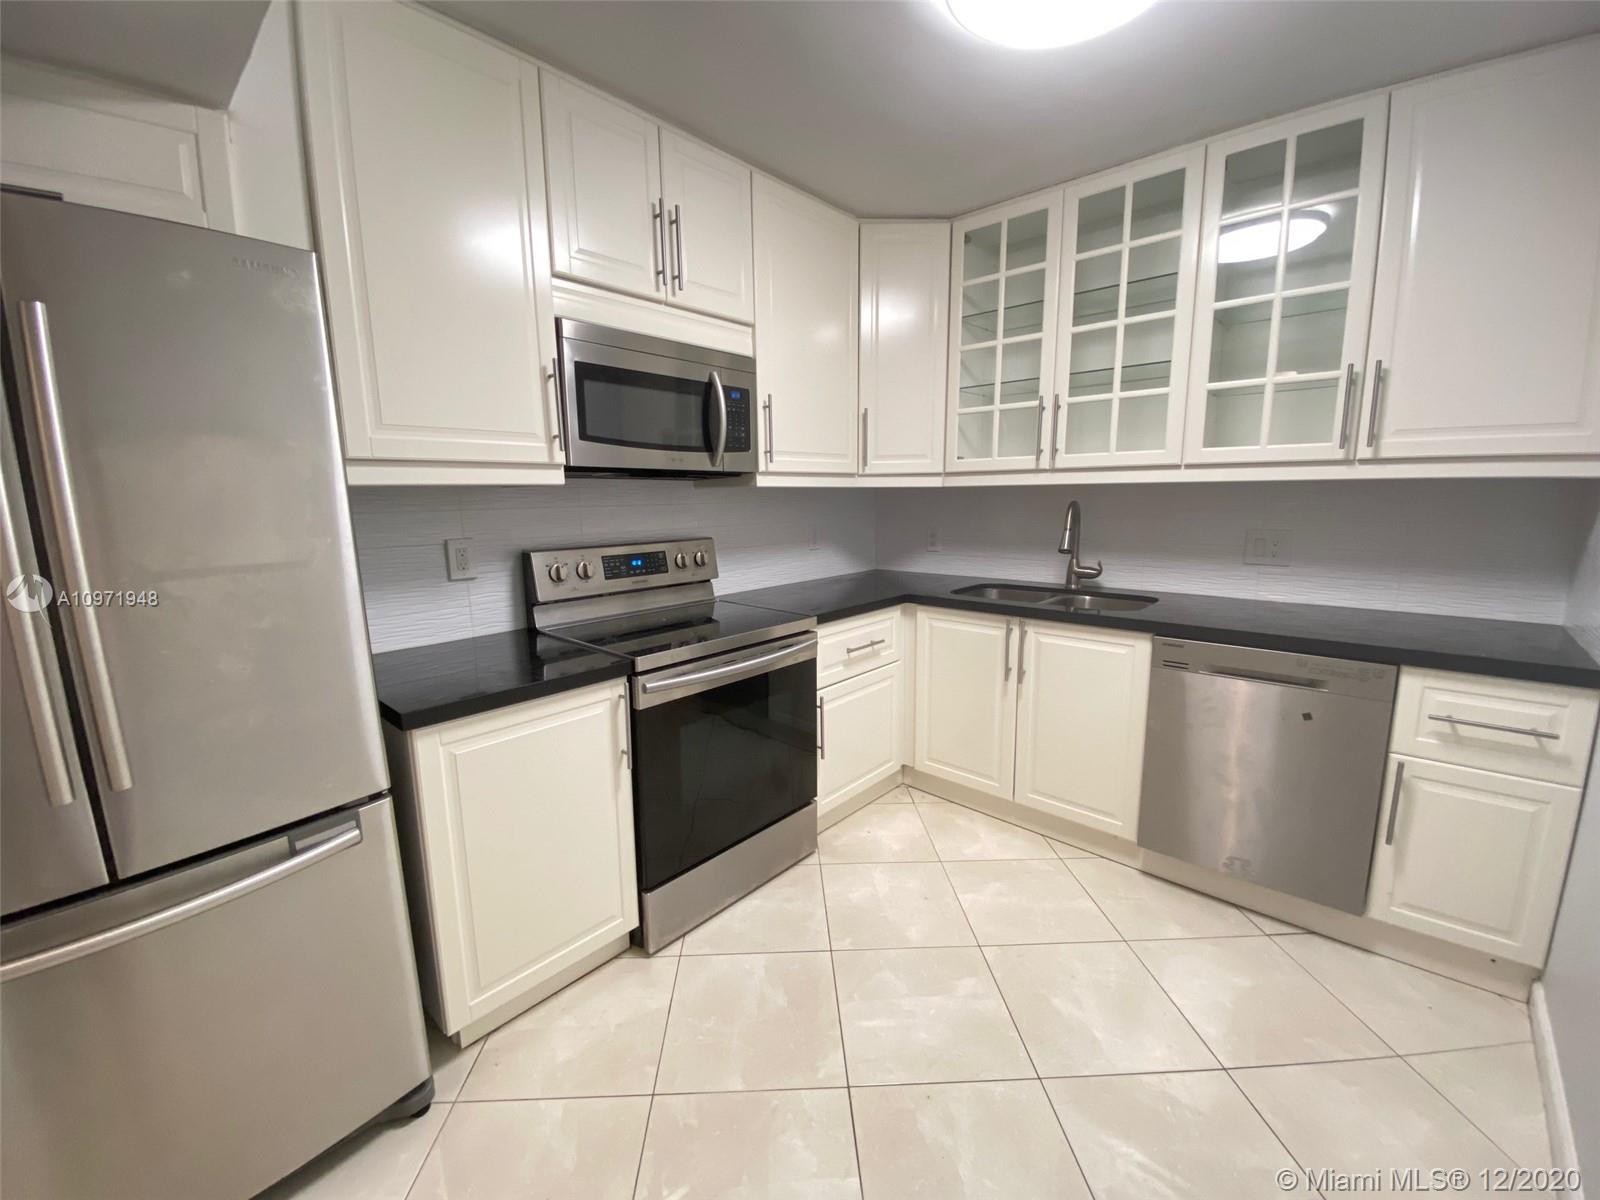 a kitchen with granite countertop a refrigerator sink and microwave